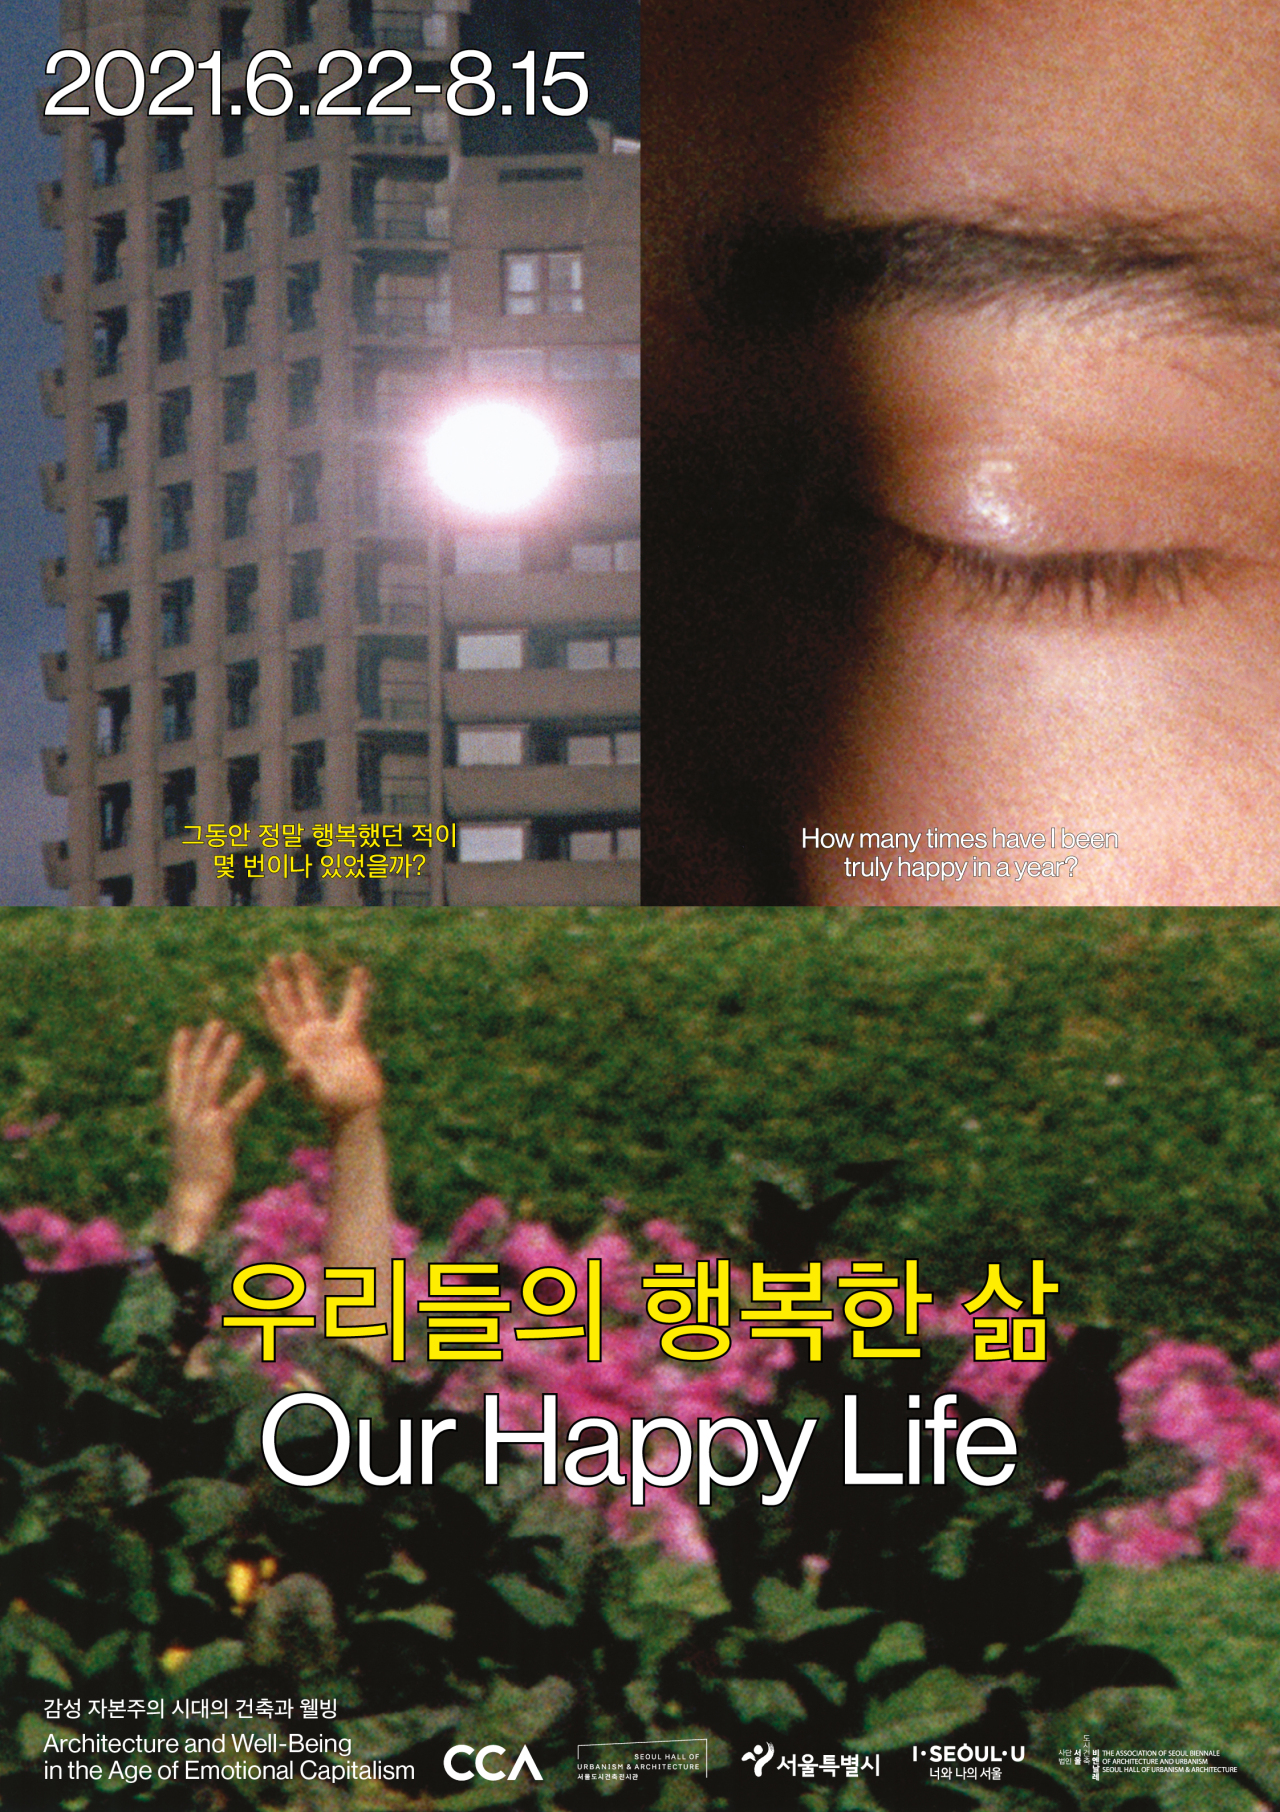 Poster for “Our Happy Life” (Seoul Hall of Urbanism and Architecture)